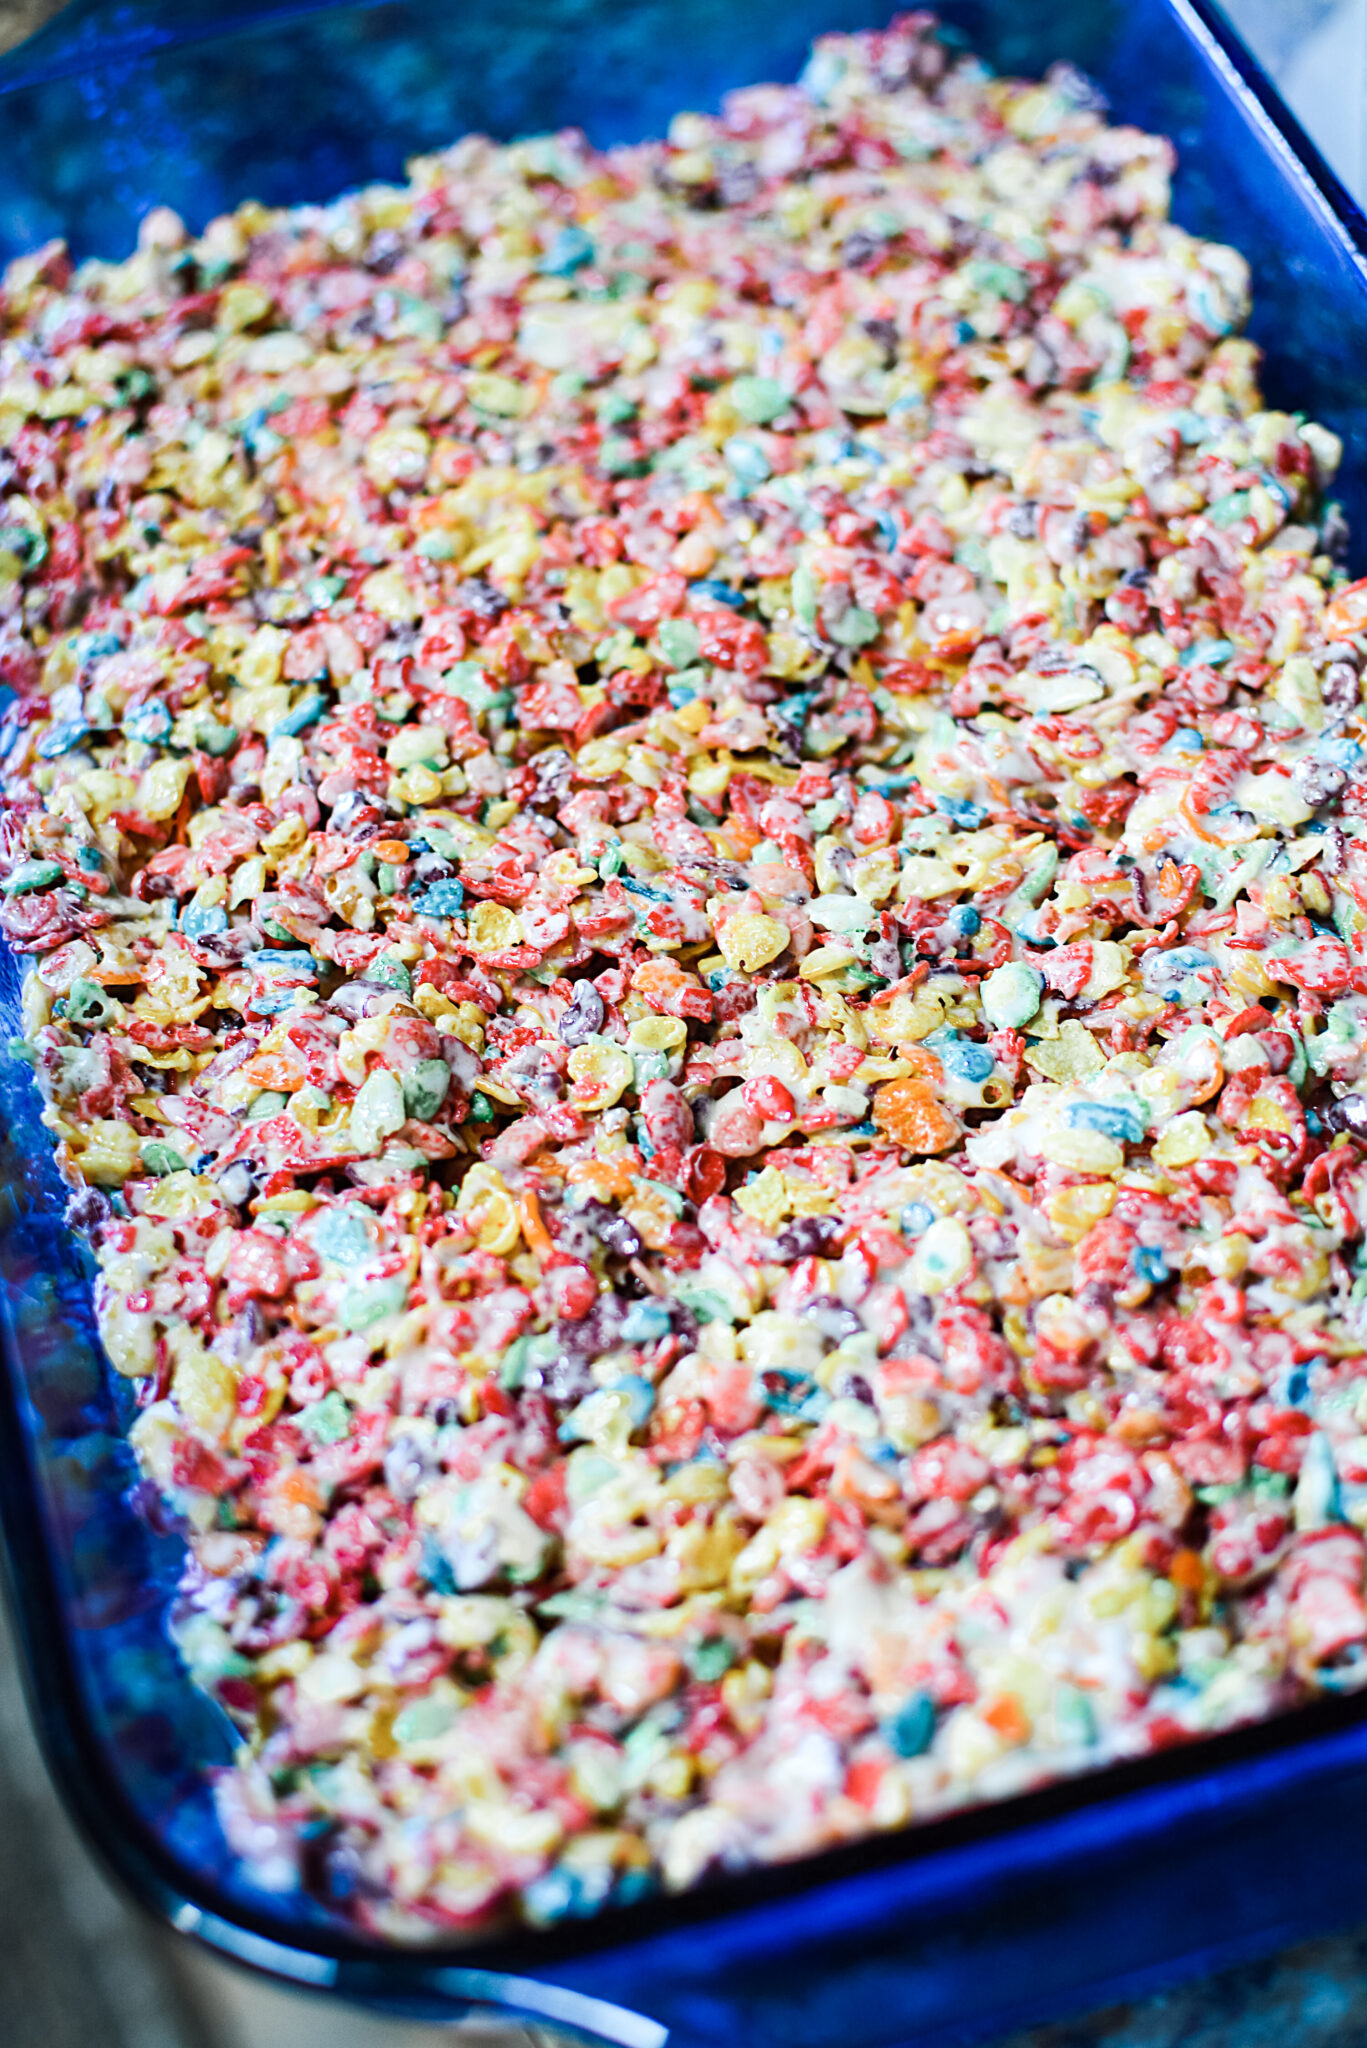 The Fruity Pebbles cereal and marshamallow mix pressed into a greased pan.